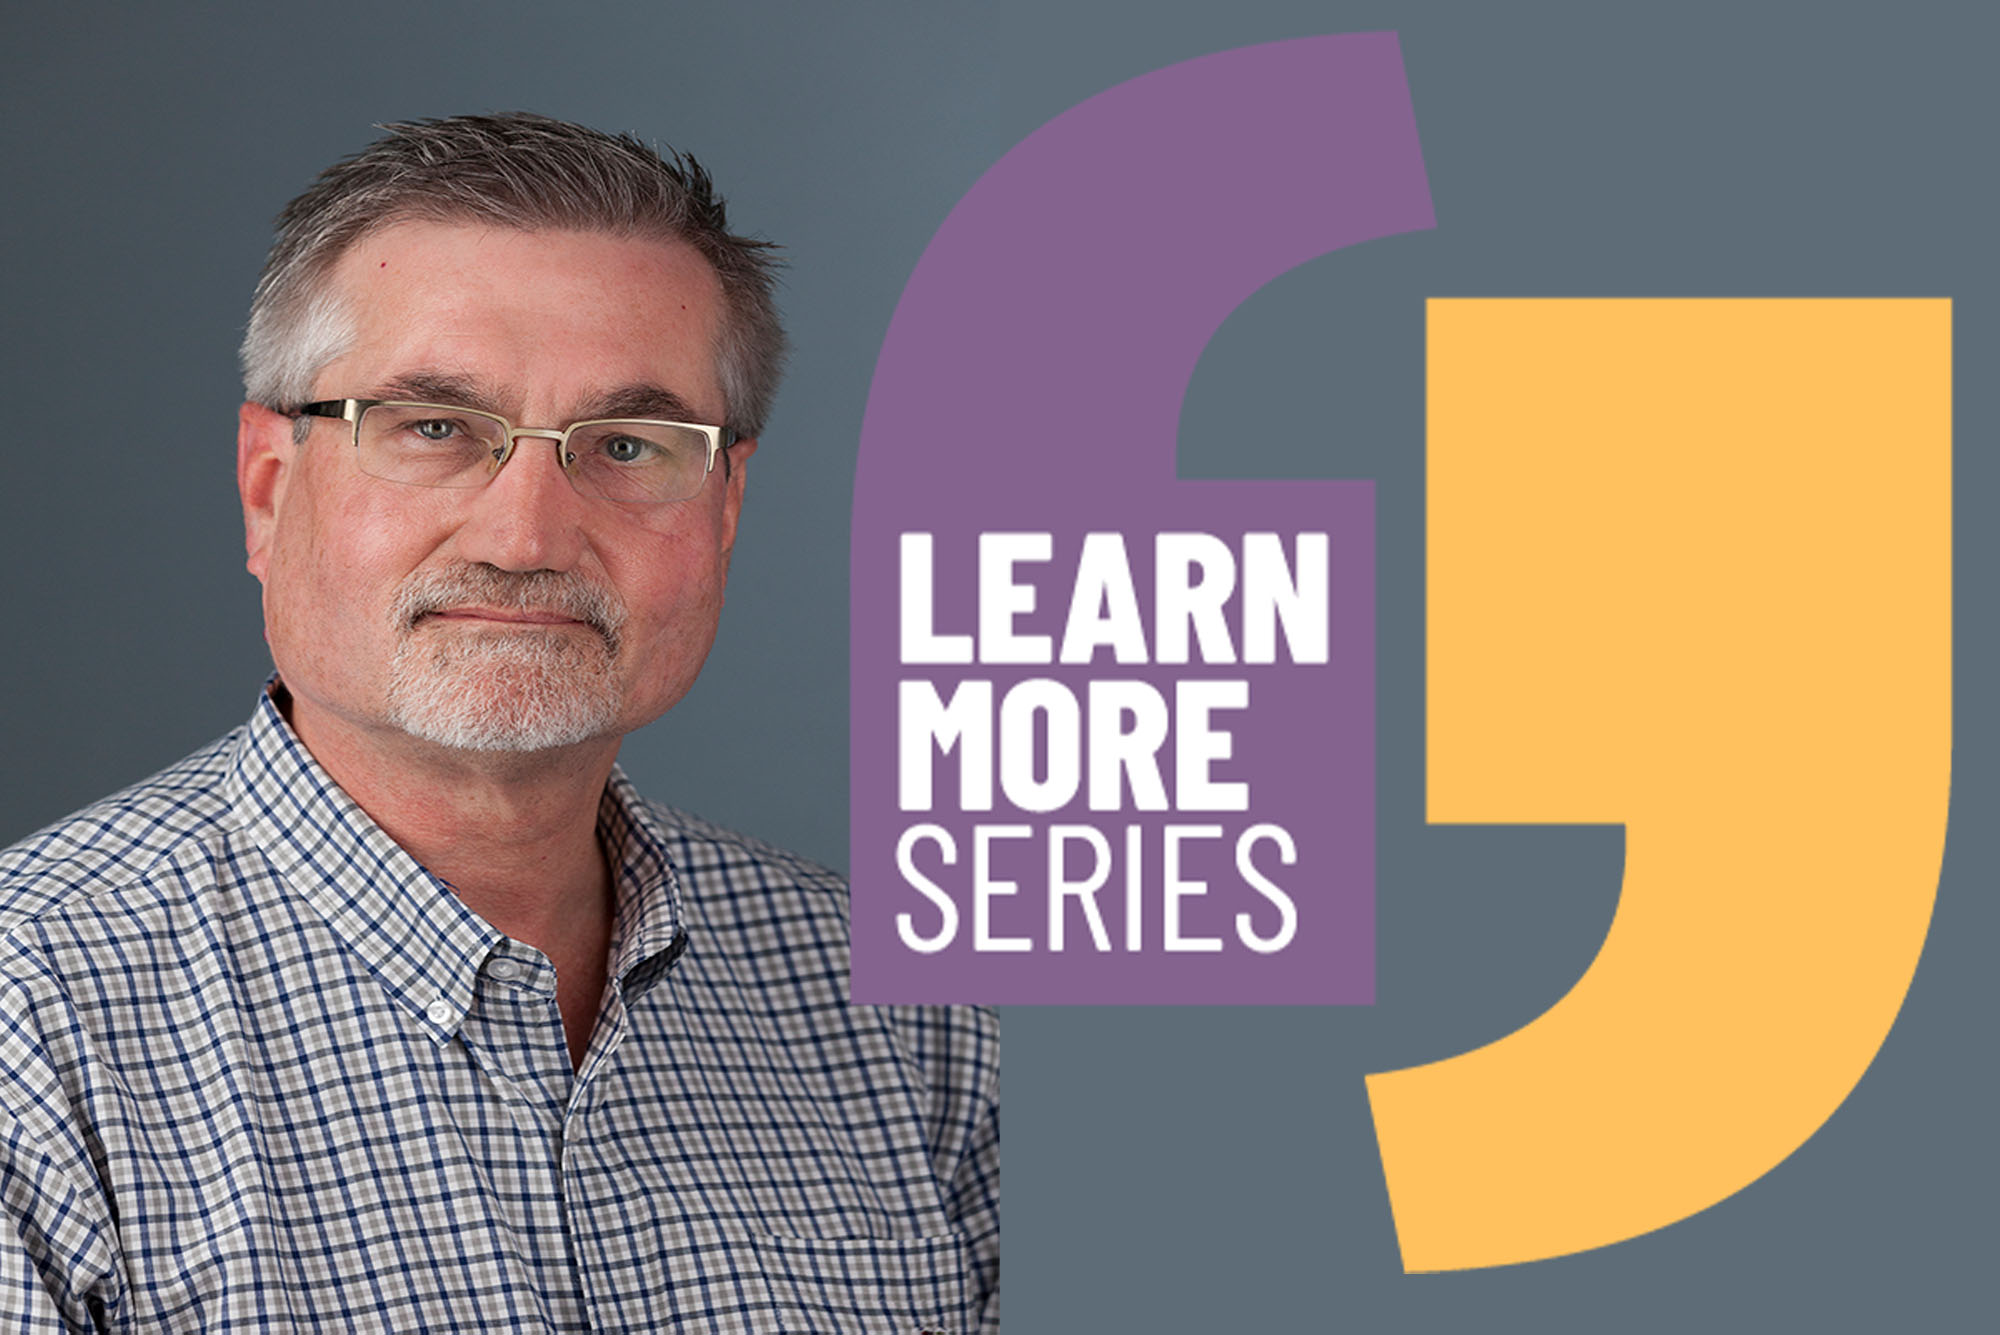 headshot photo of Michael Wehmeyer next to logo for the BU Diversity & Inclusion series. Logo text reads "LEARN MORE SERIES"